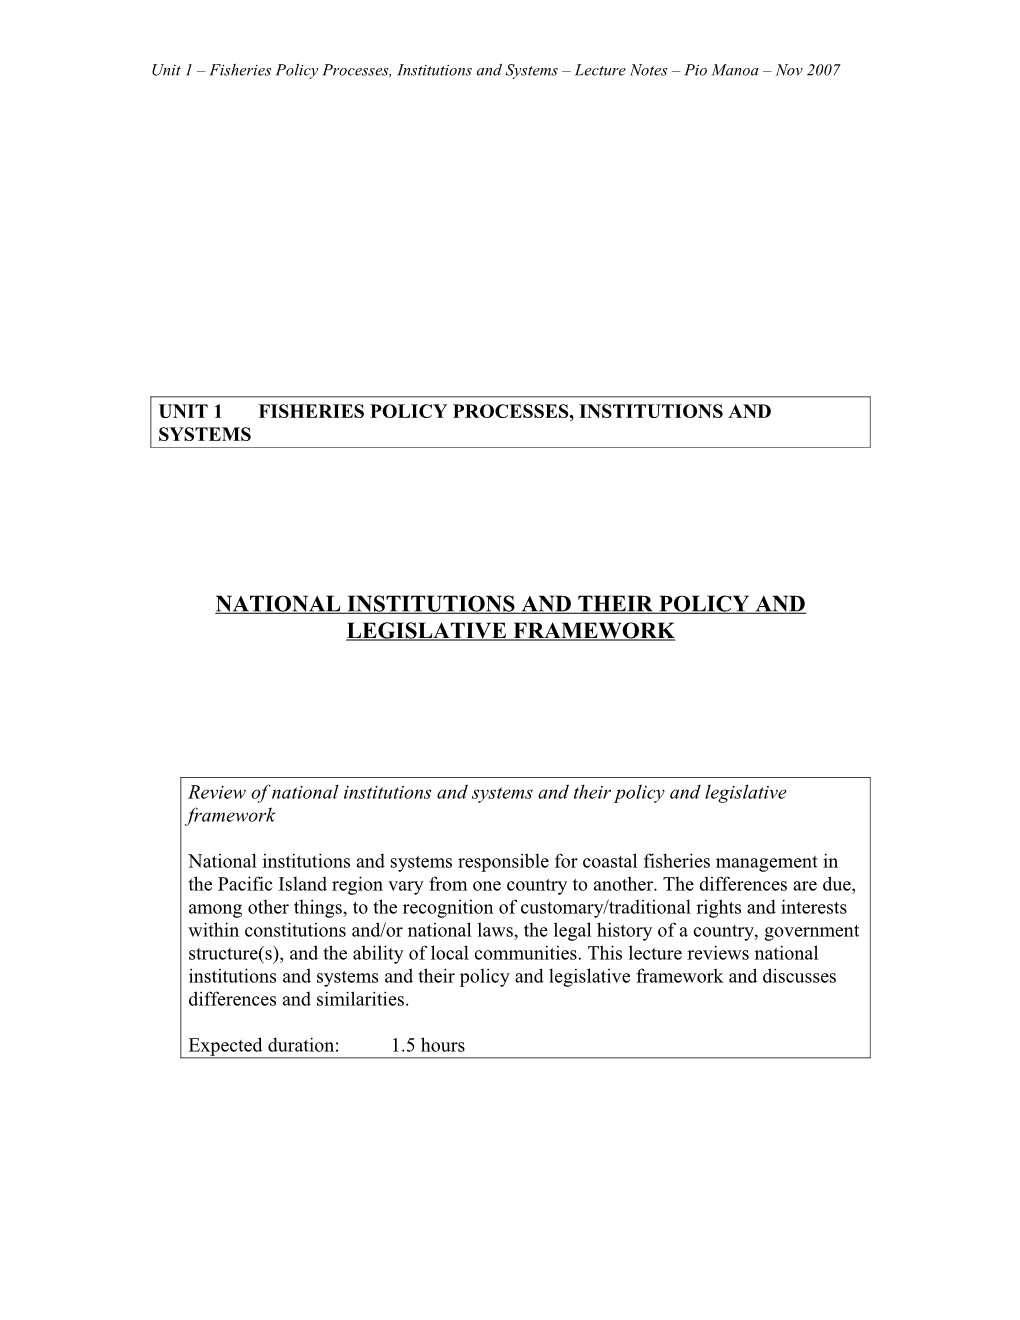 National Institutions and the Policy and Legislative Framework